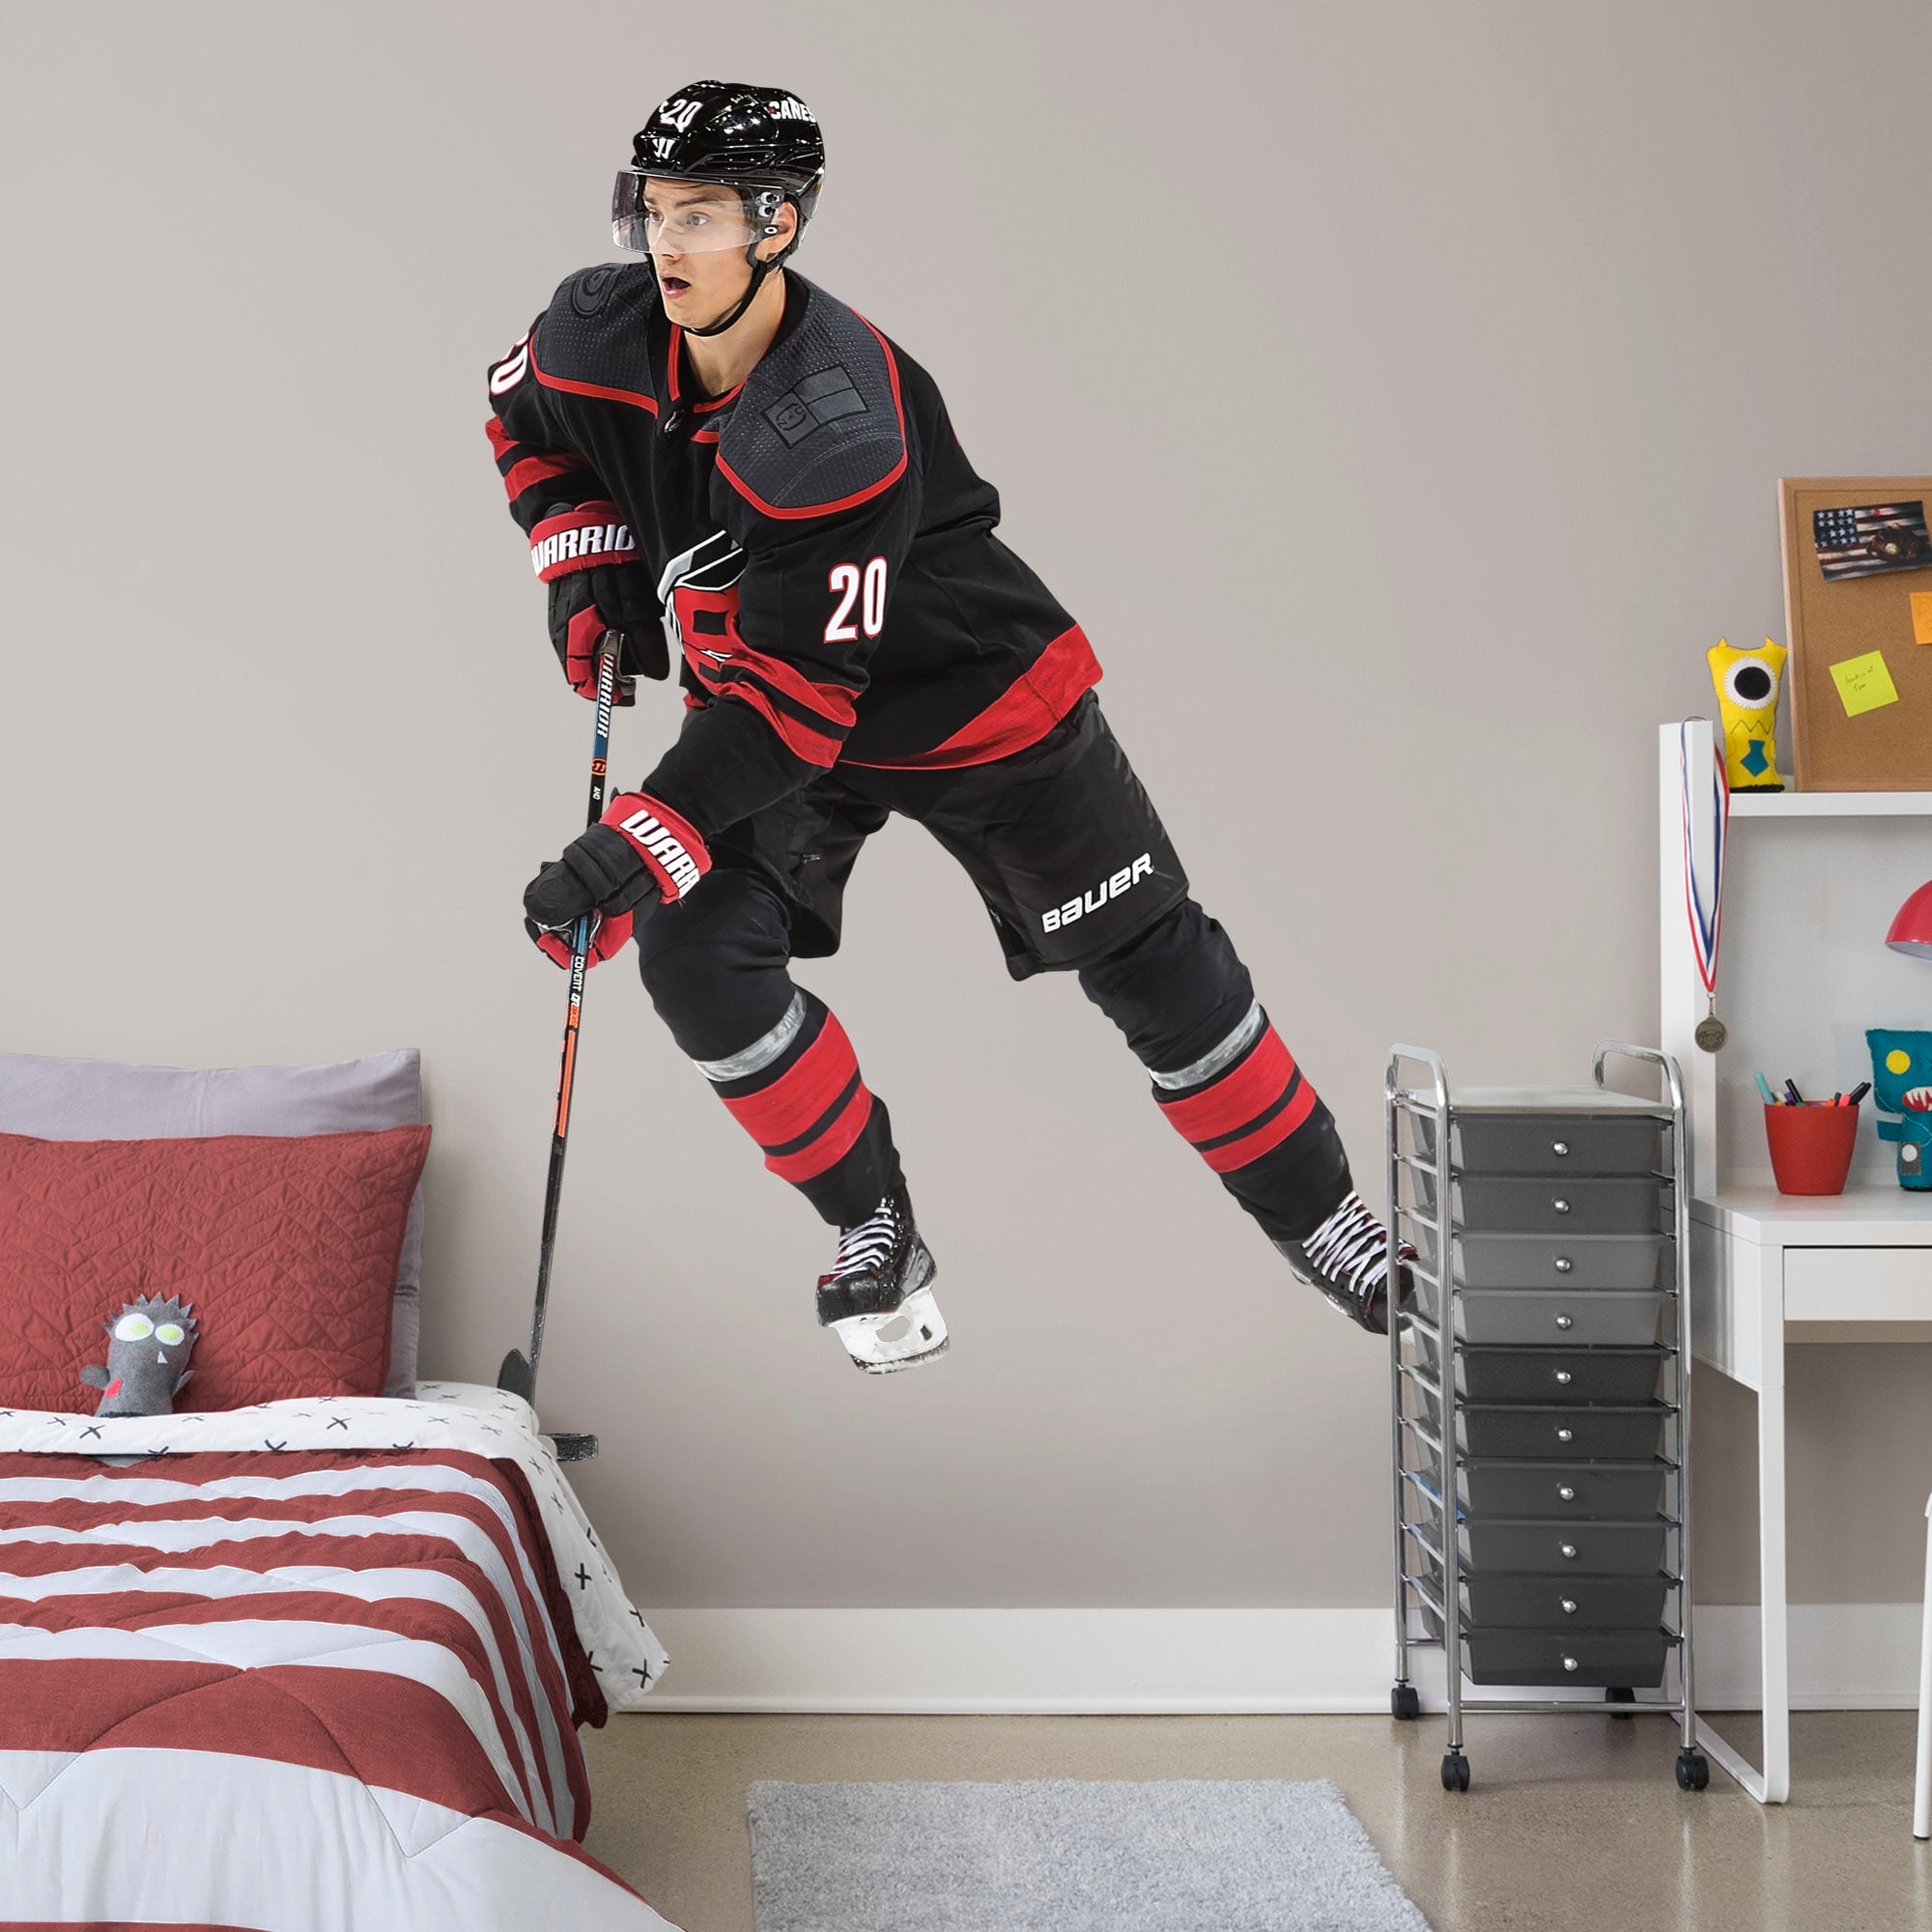 Sebastian Aho for Carolina Hurricanes - Officially Licensed NHL Removable Wall Decal Life-Size Athlete + 2 Decals (55"W x 80"H)